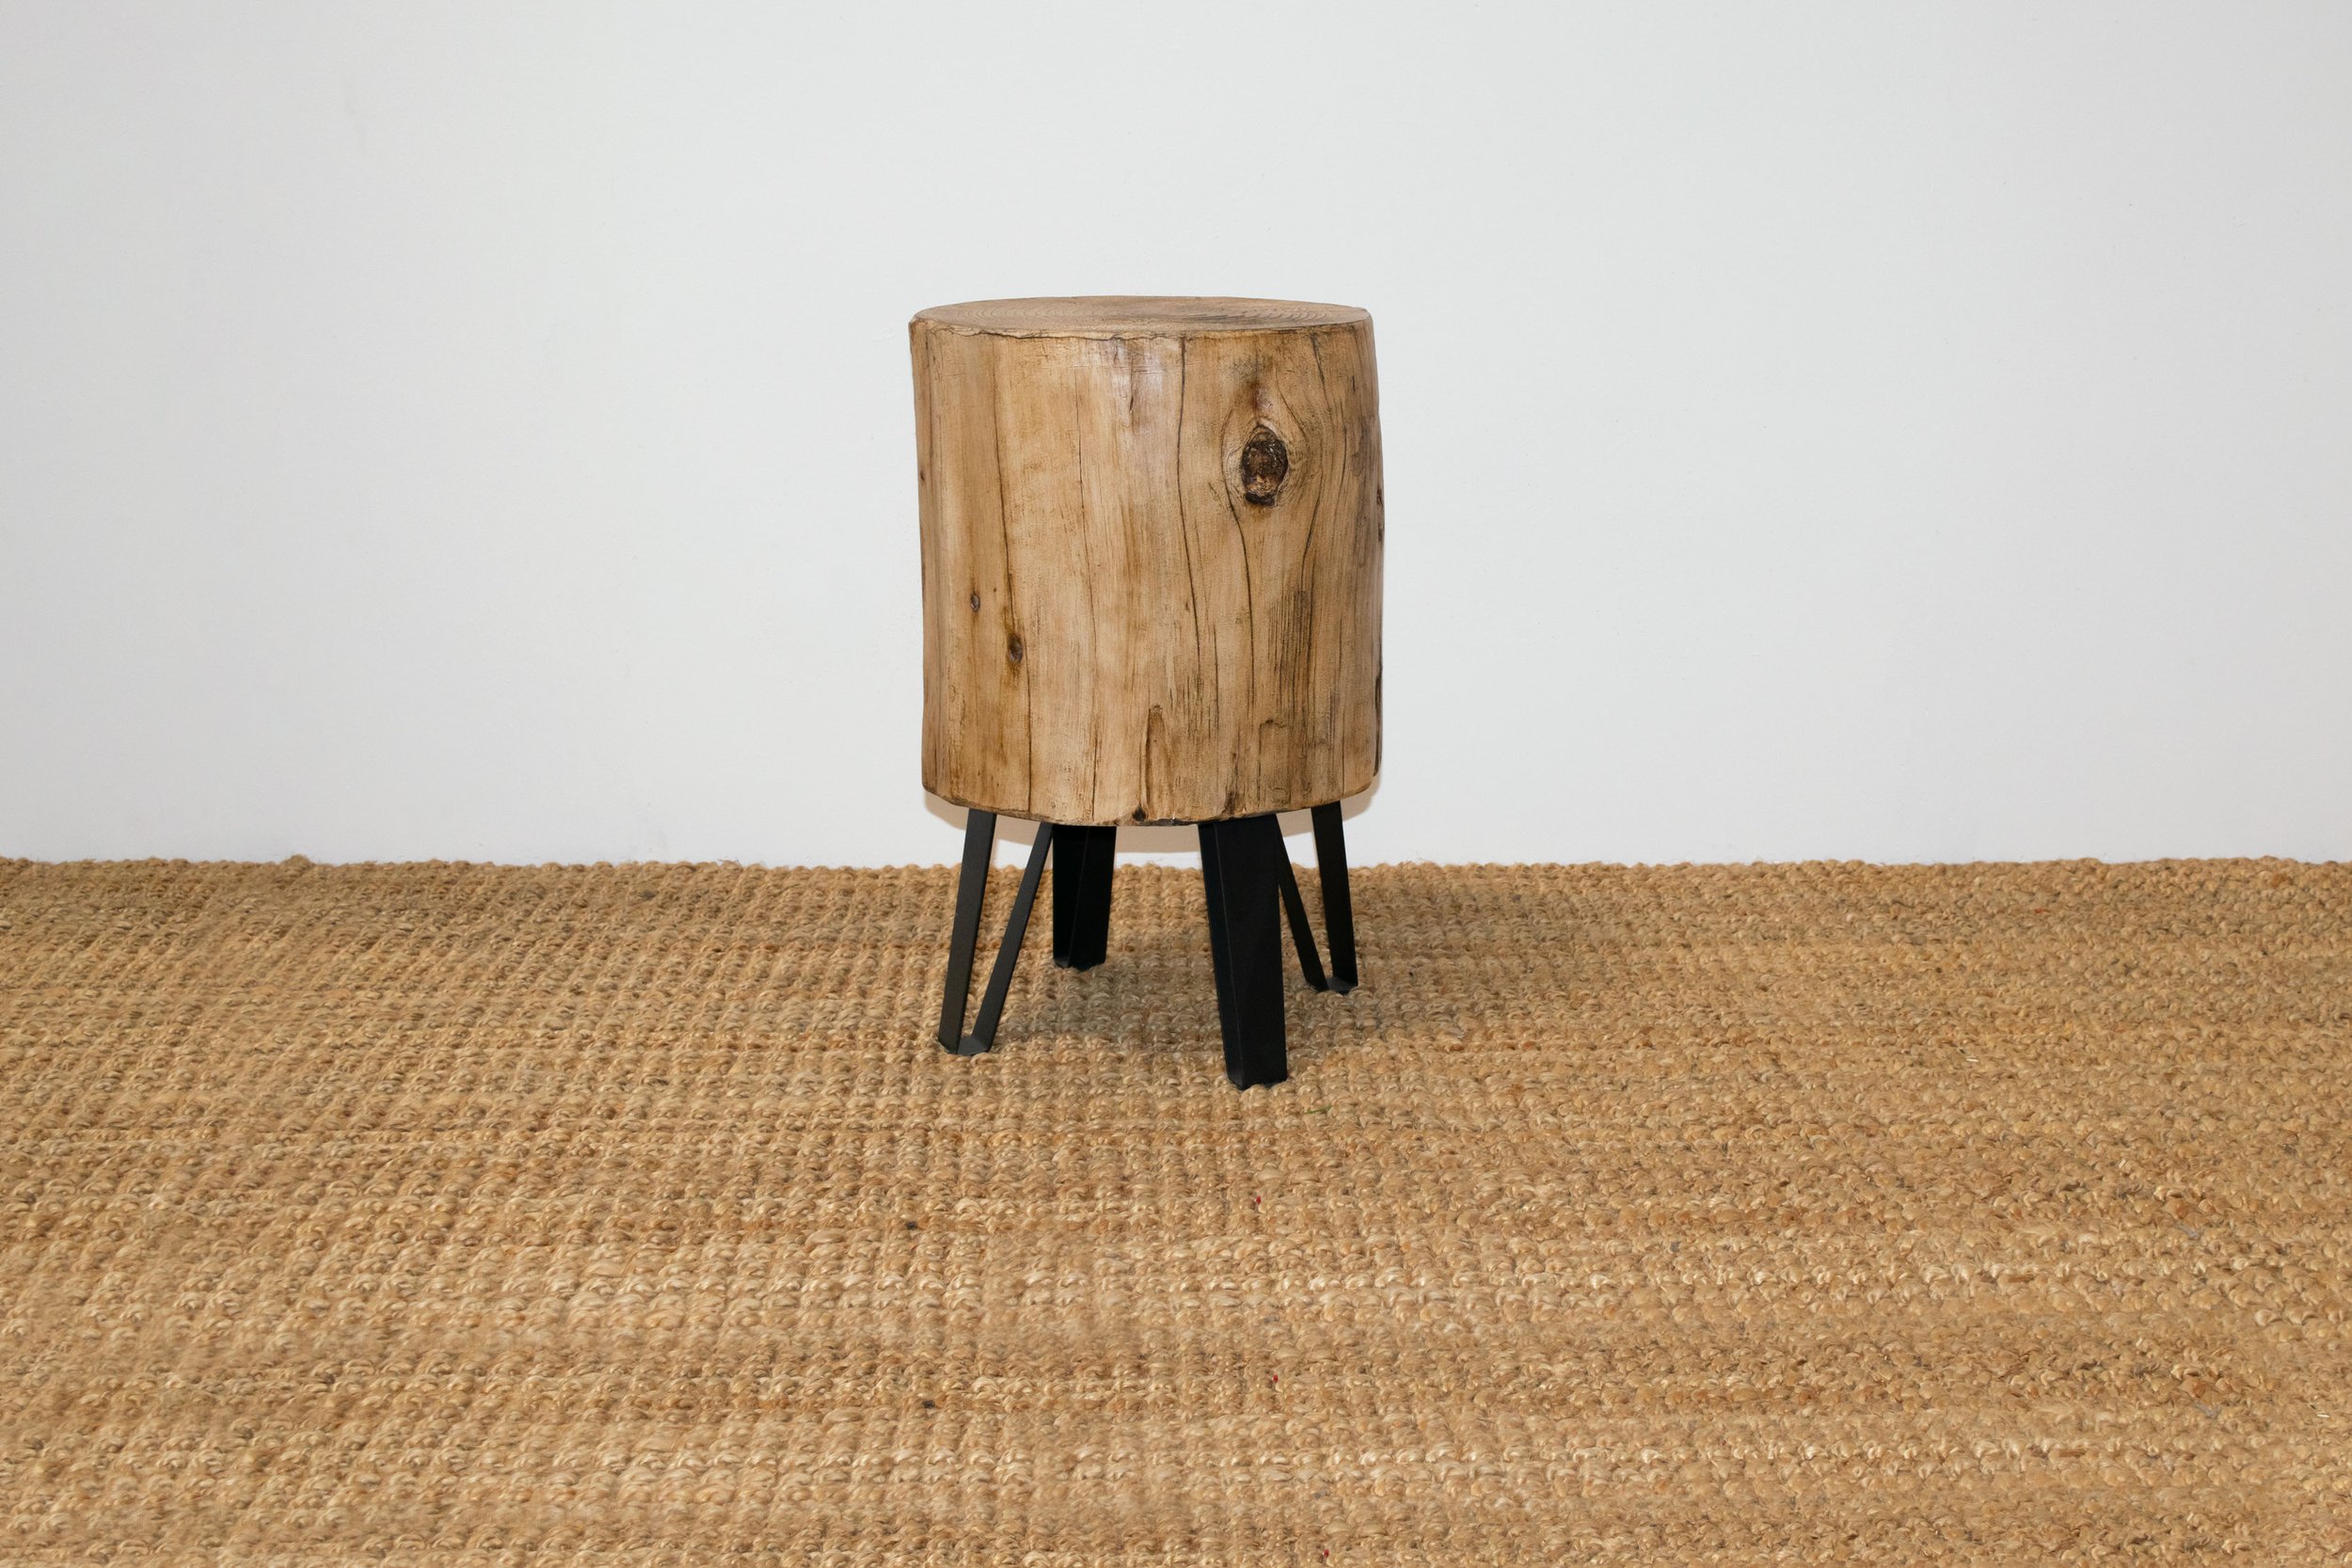 The Stump End Table